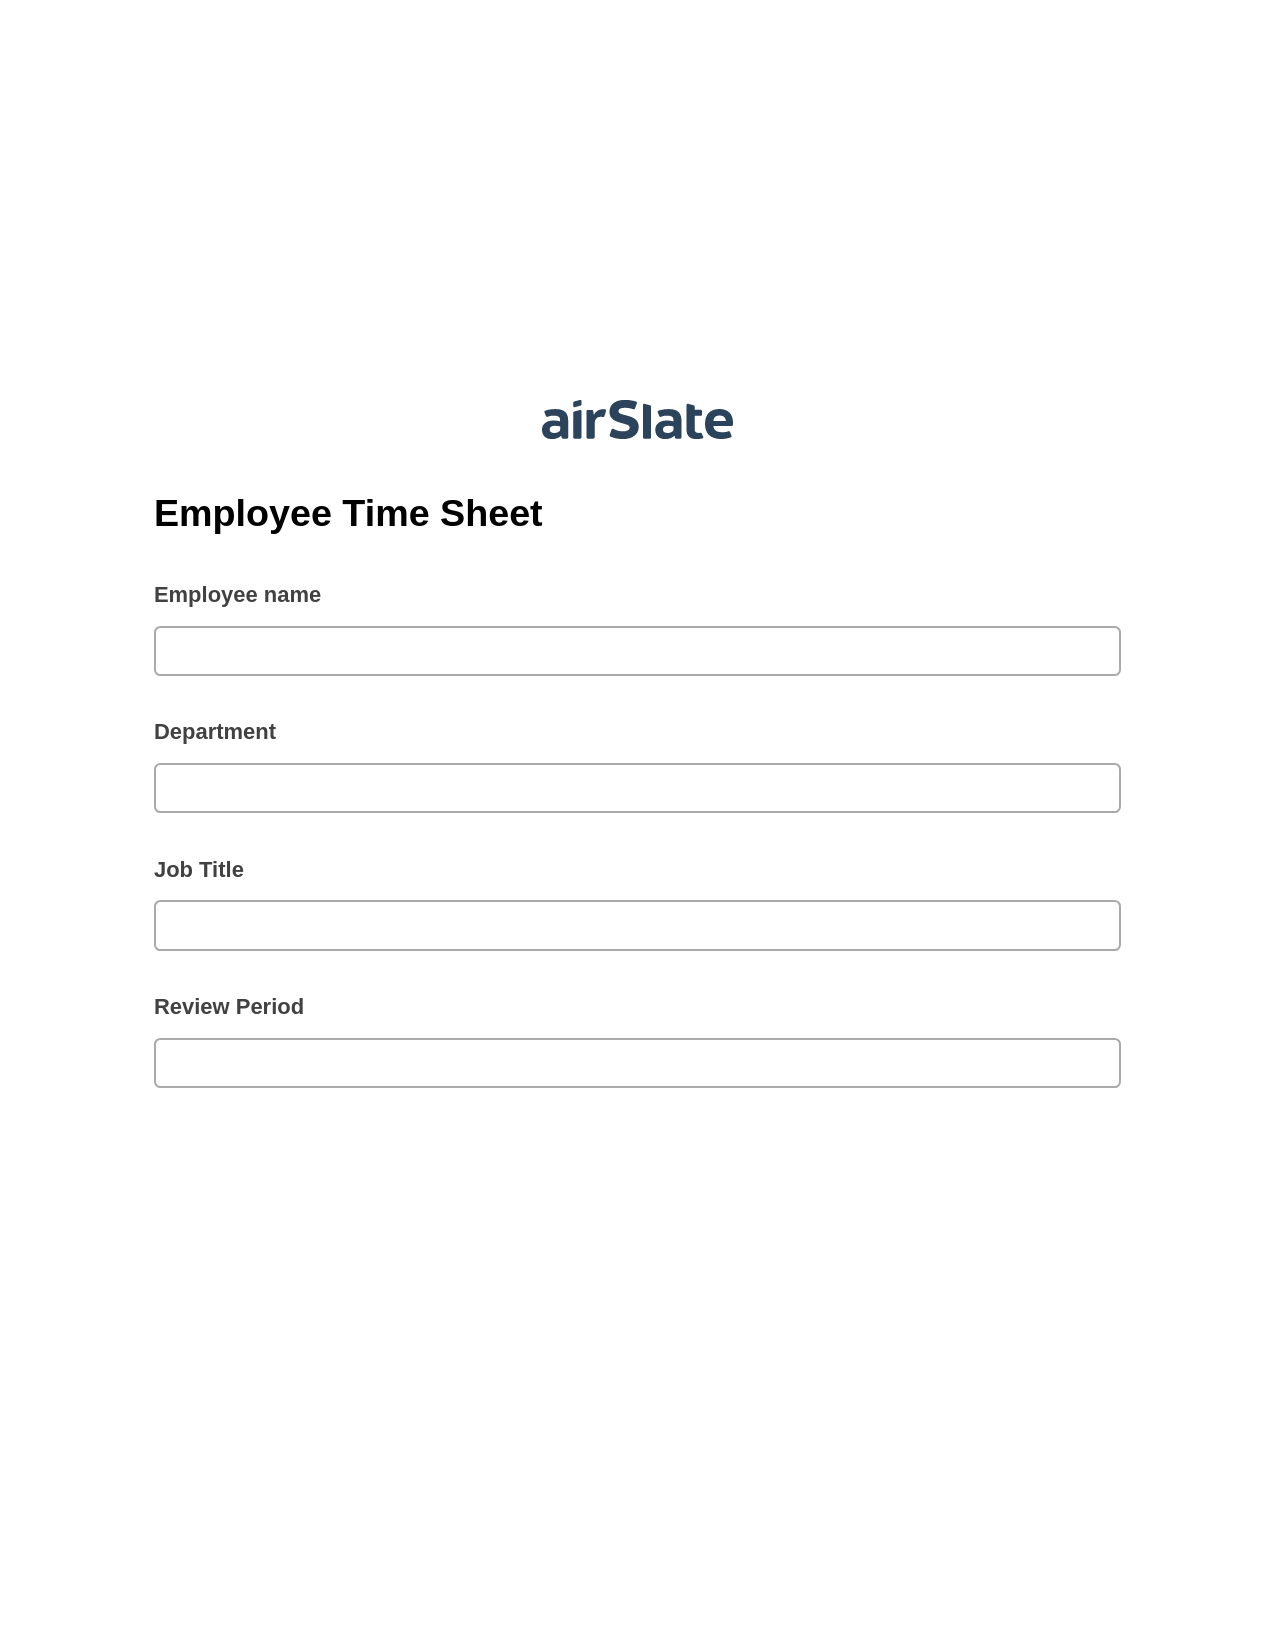 Multirole Employee Time Sheet Pre-fill Dropdowns from Airtable, Update Audit Trail Bot, Email Notification Postfinish Bot